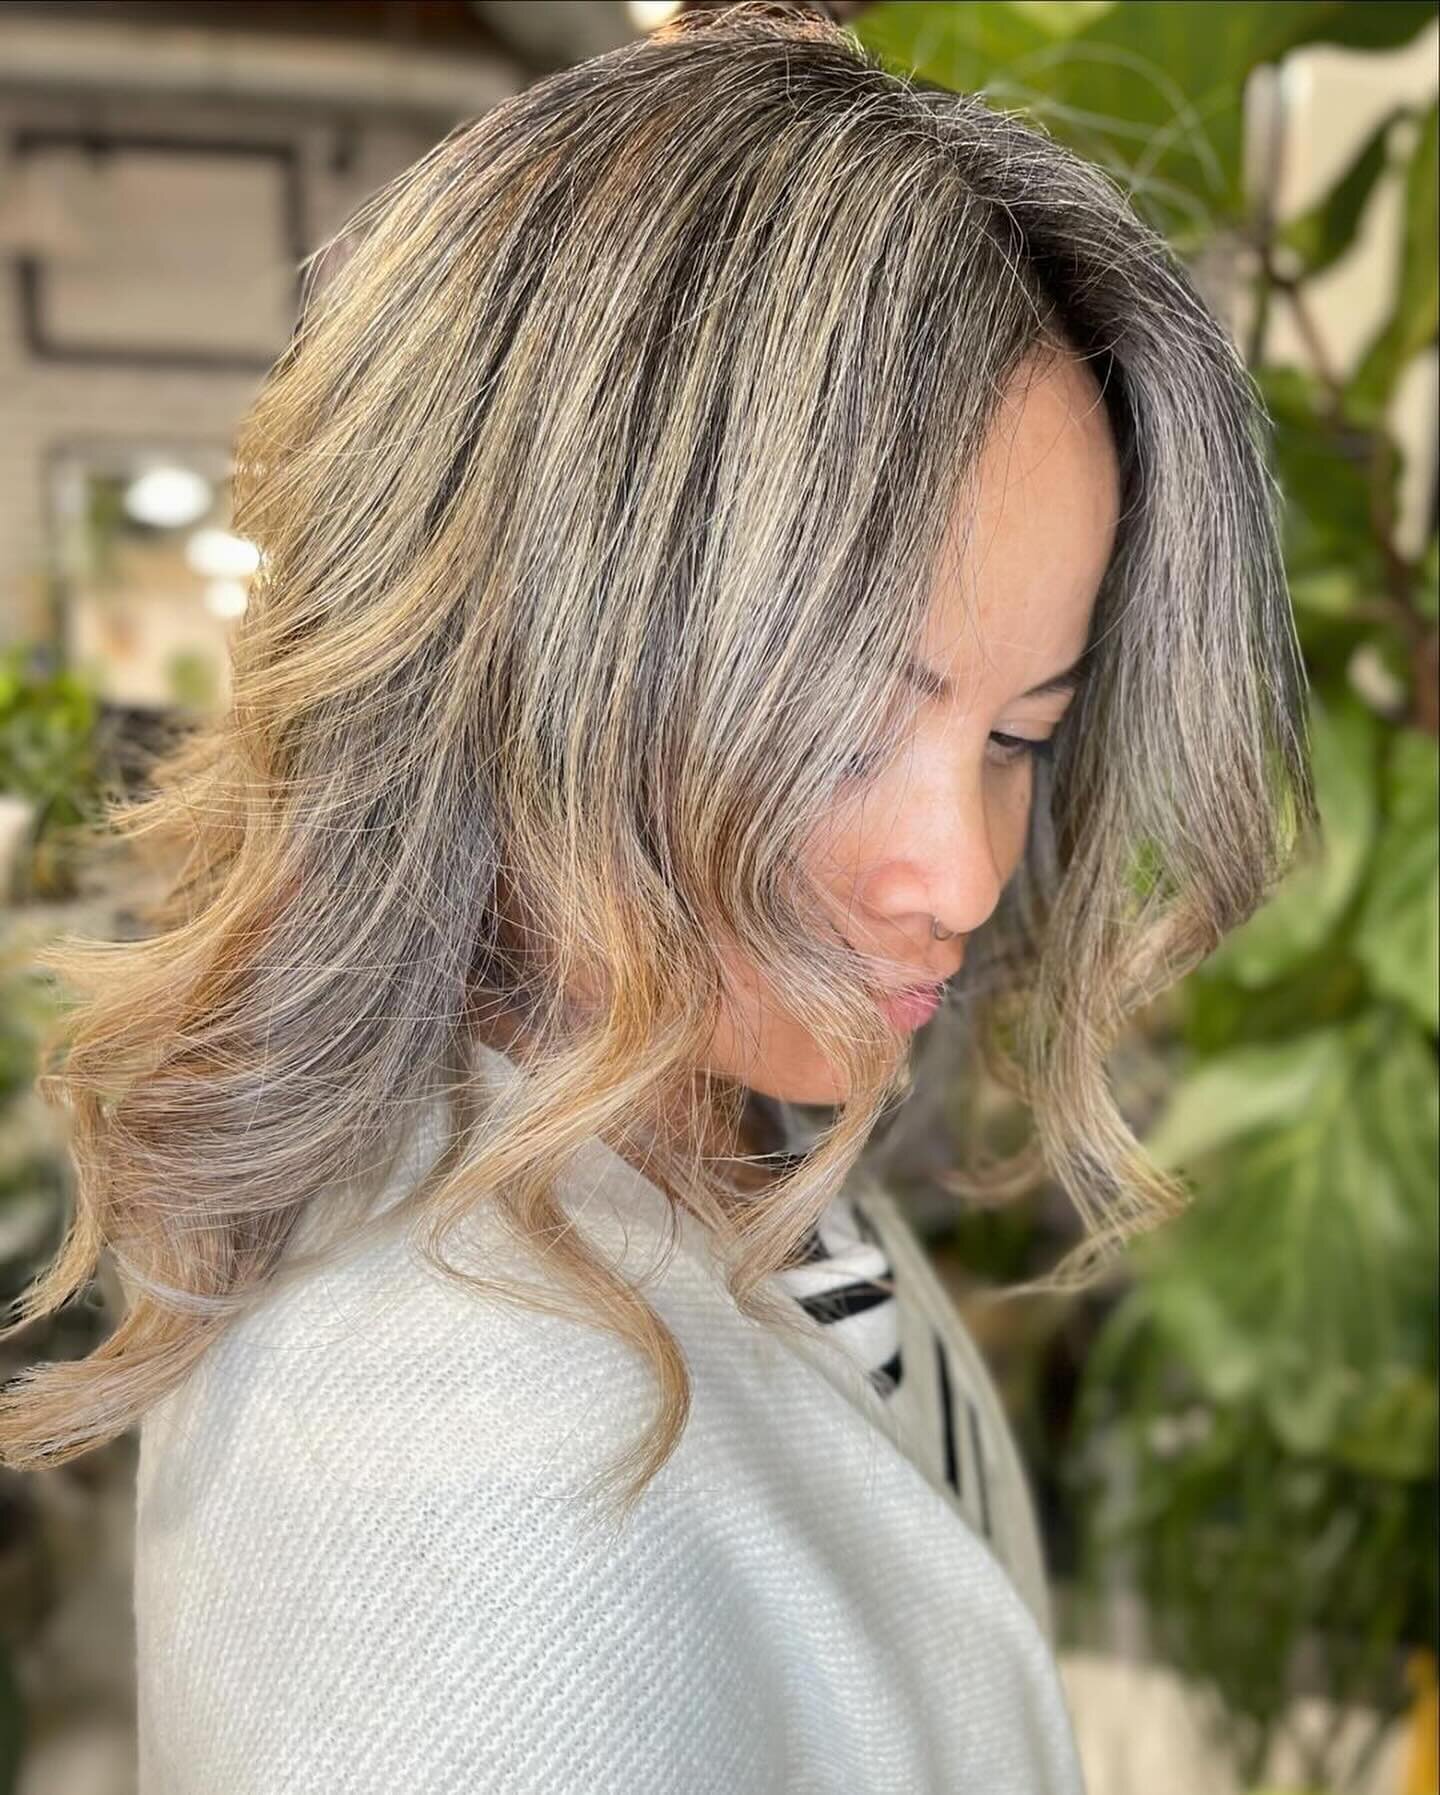 Loyalty ✨
This amazing woman allowed me to work some magic and blend her natural color. She&rsquo;s striking as always! 
1st session: 8 hours
.
.
.
.
.
.
.
.
.
Hair by Maureen @colorloungela
#consultation #icy #highlights #blonding #blending #balayag